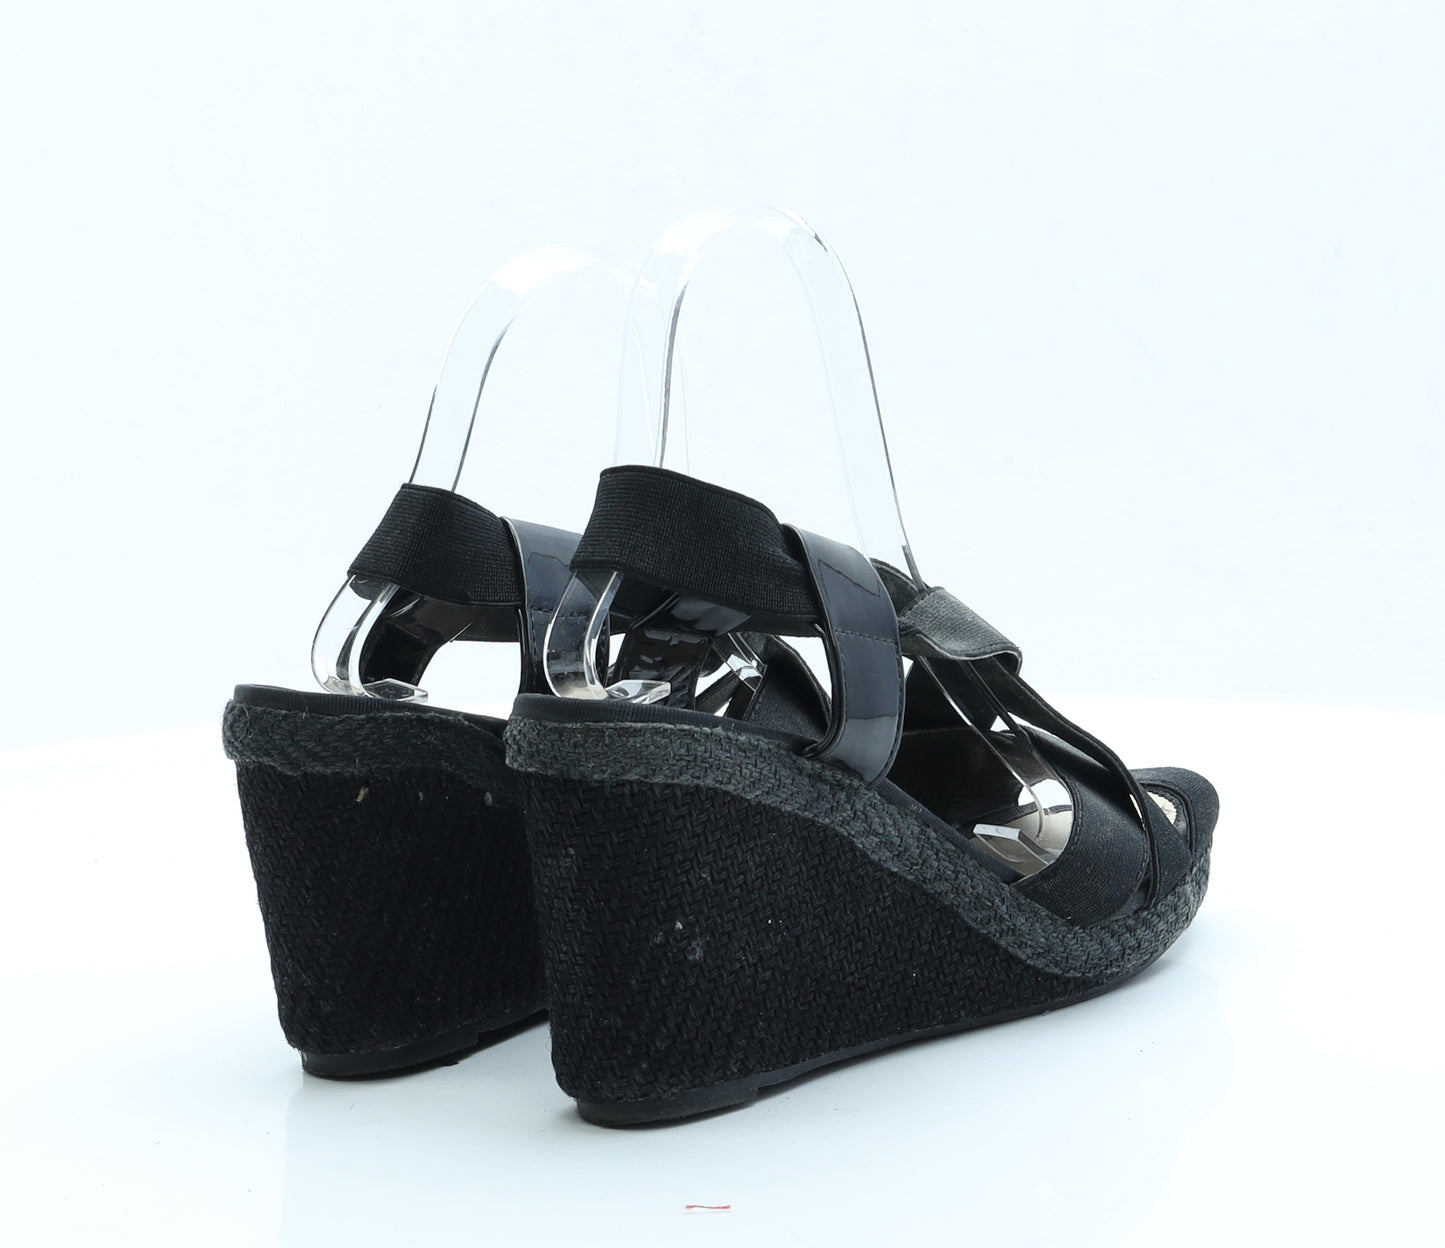 The Collection Womens Black  Polyester Platform Heel 6 EUR 39